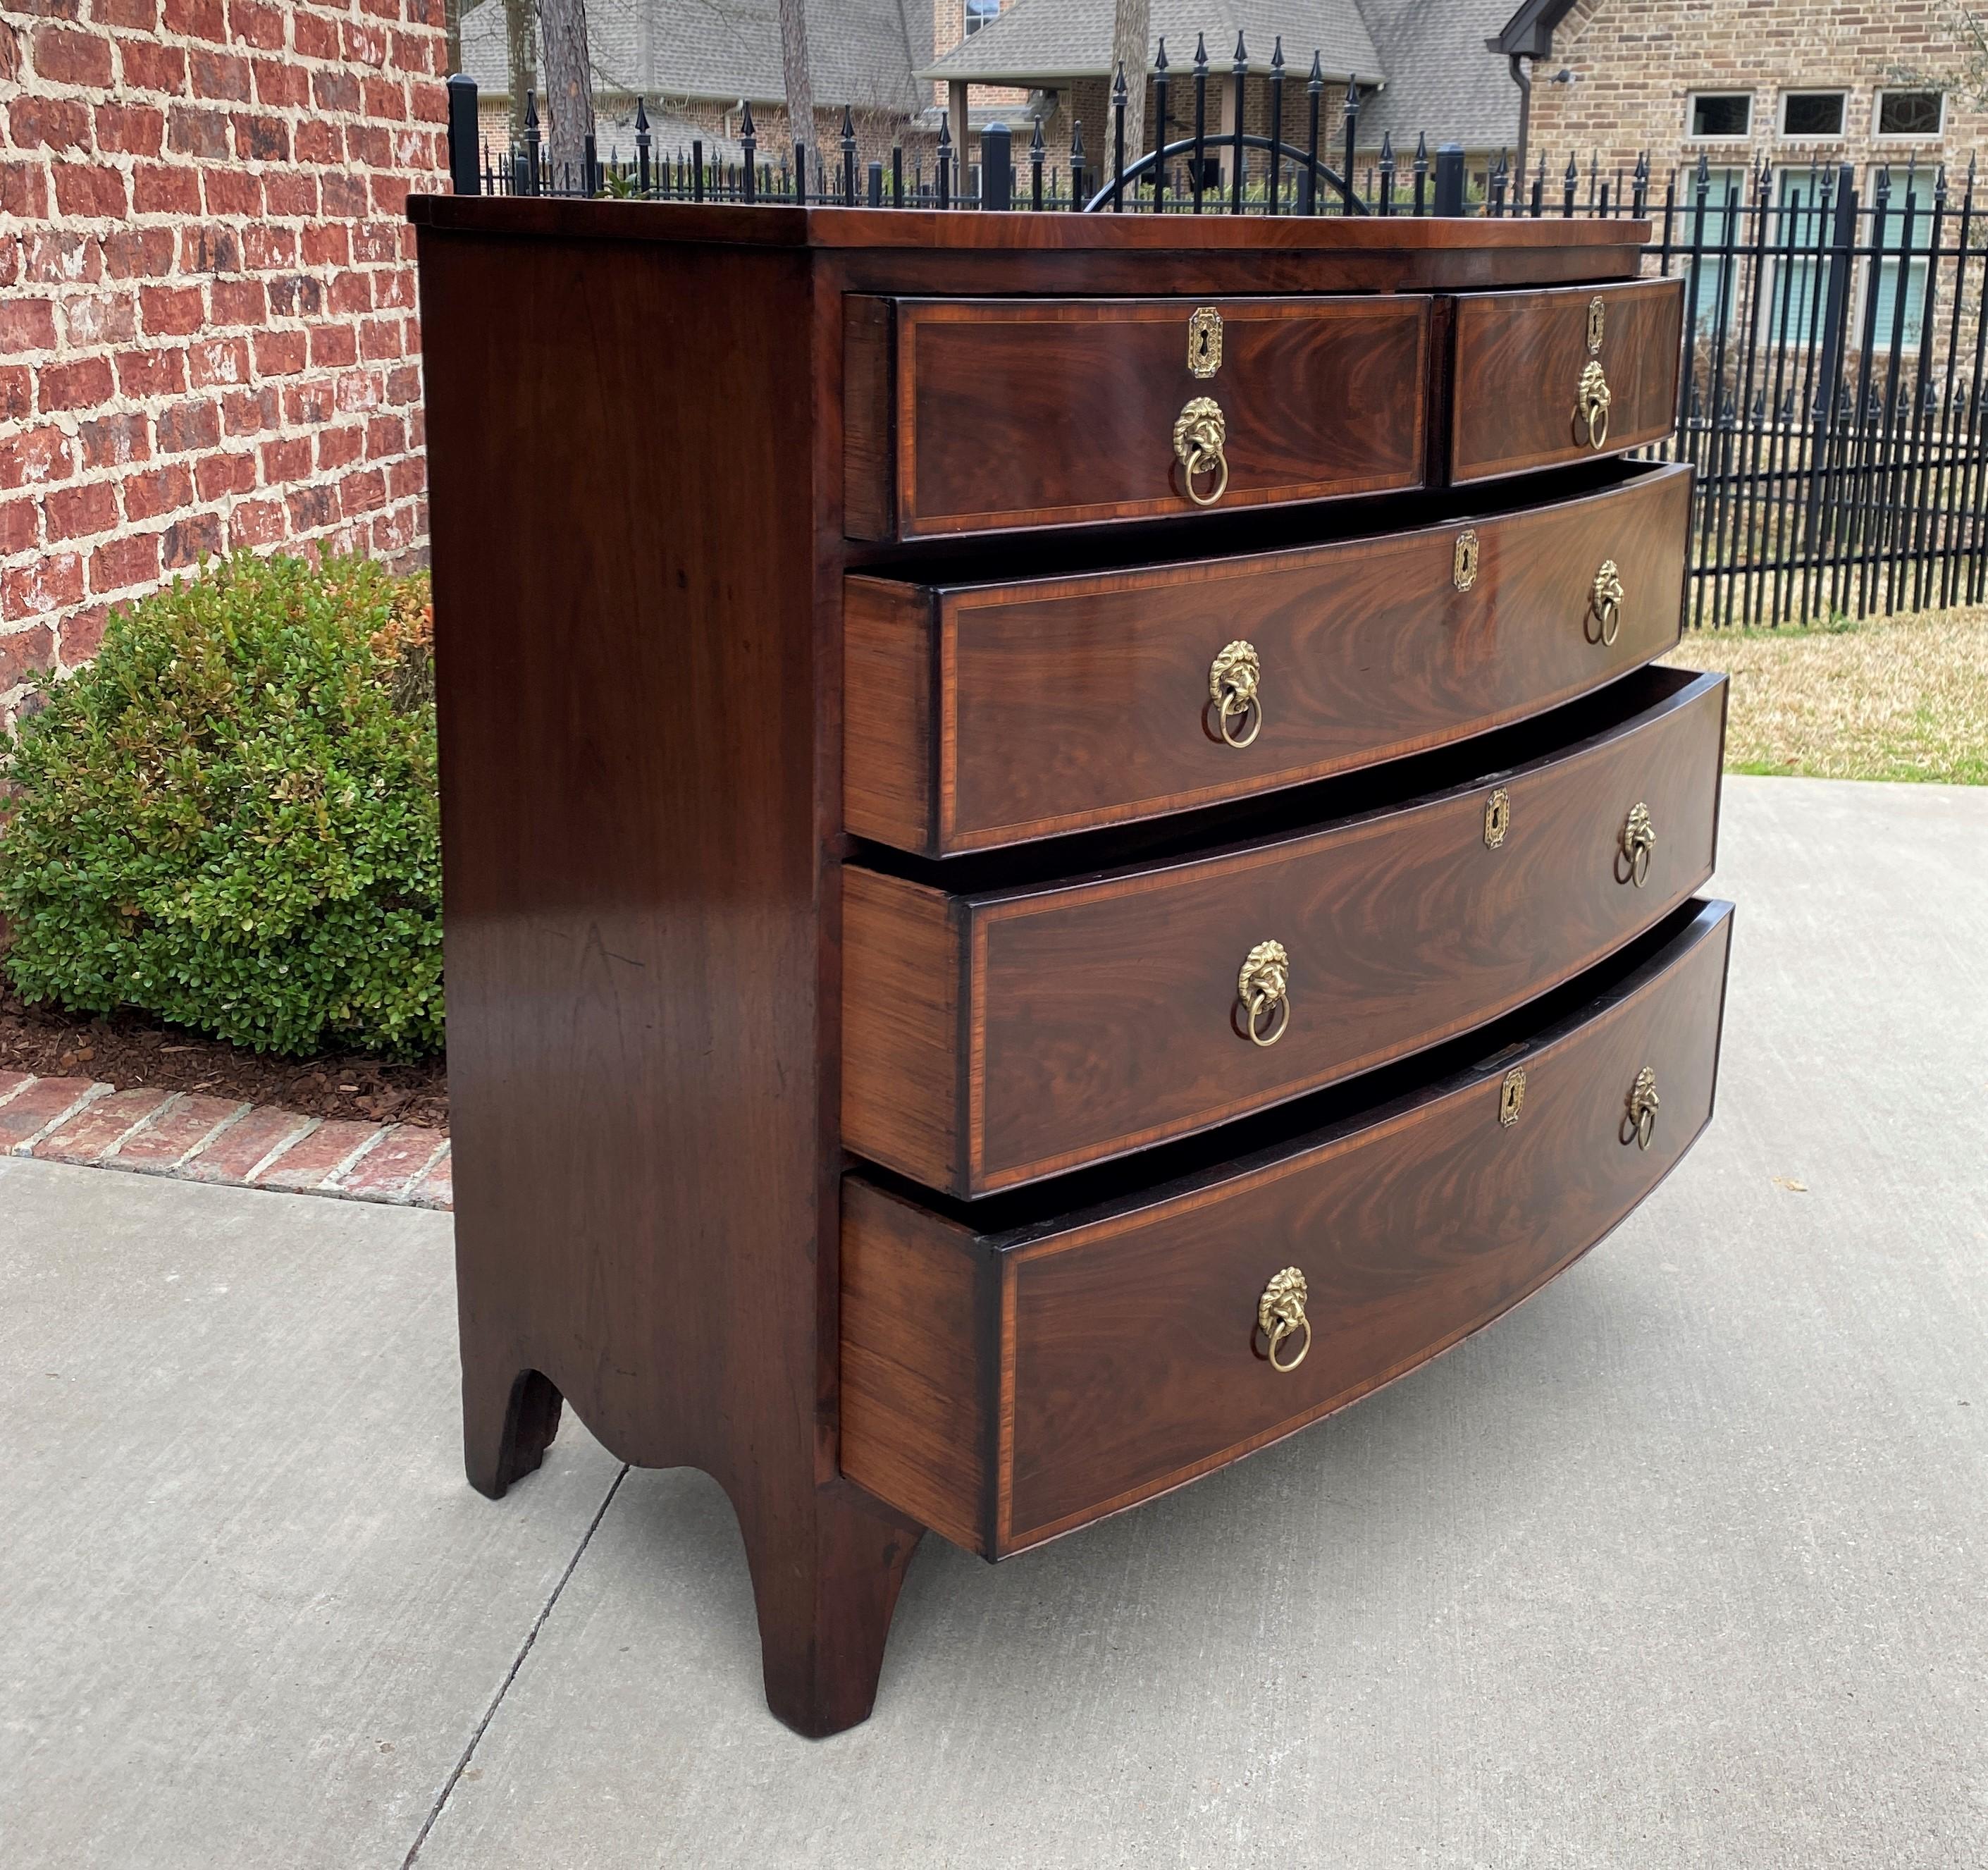 Edwardian Antique English Chest of Drawers Bow Front Mahogany 5-Drawer Commode 19th C